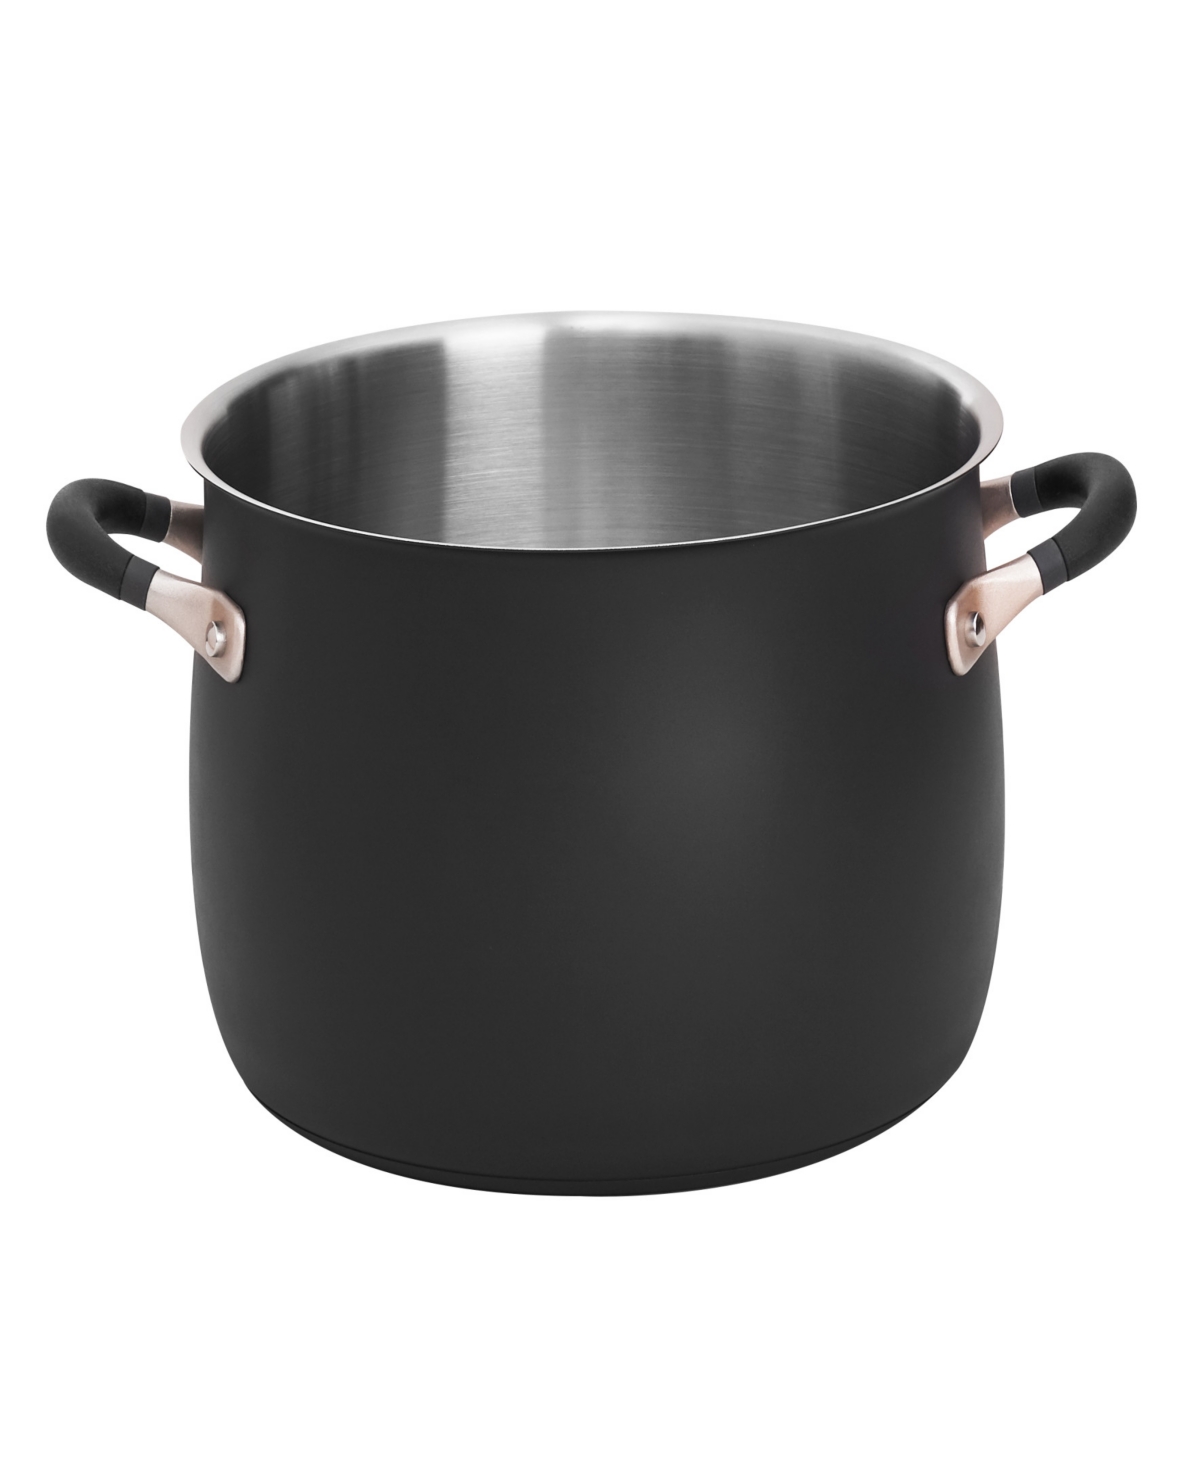 Meyer Accent Series Stainless Steel 8-quart Stockpot In Matte Black With Gold Accent